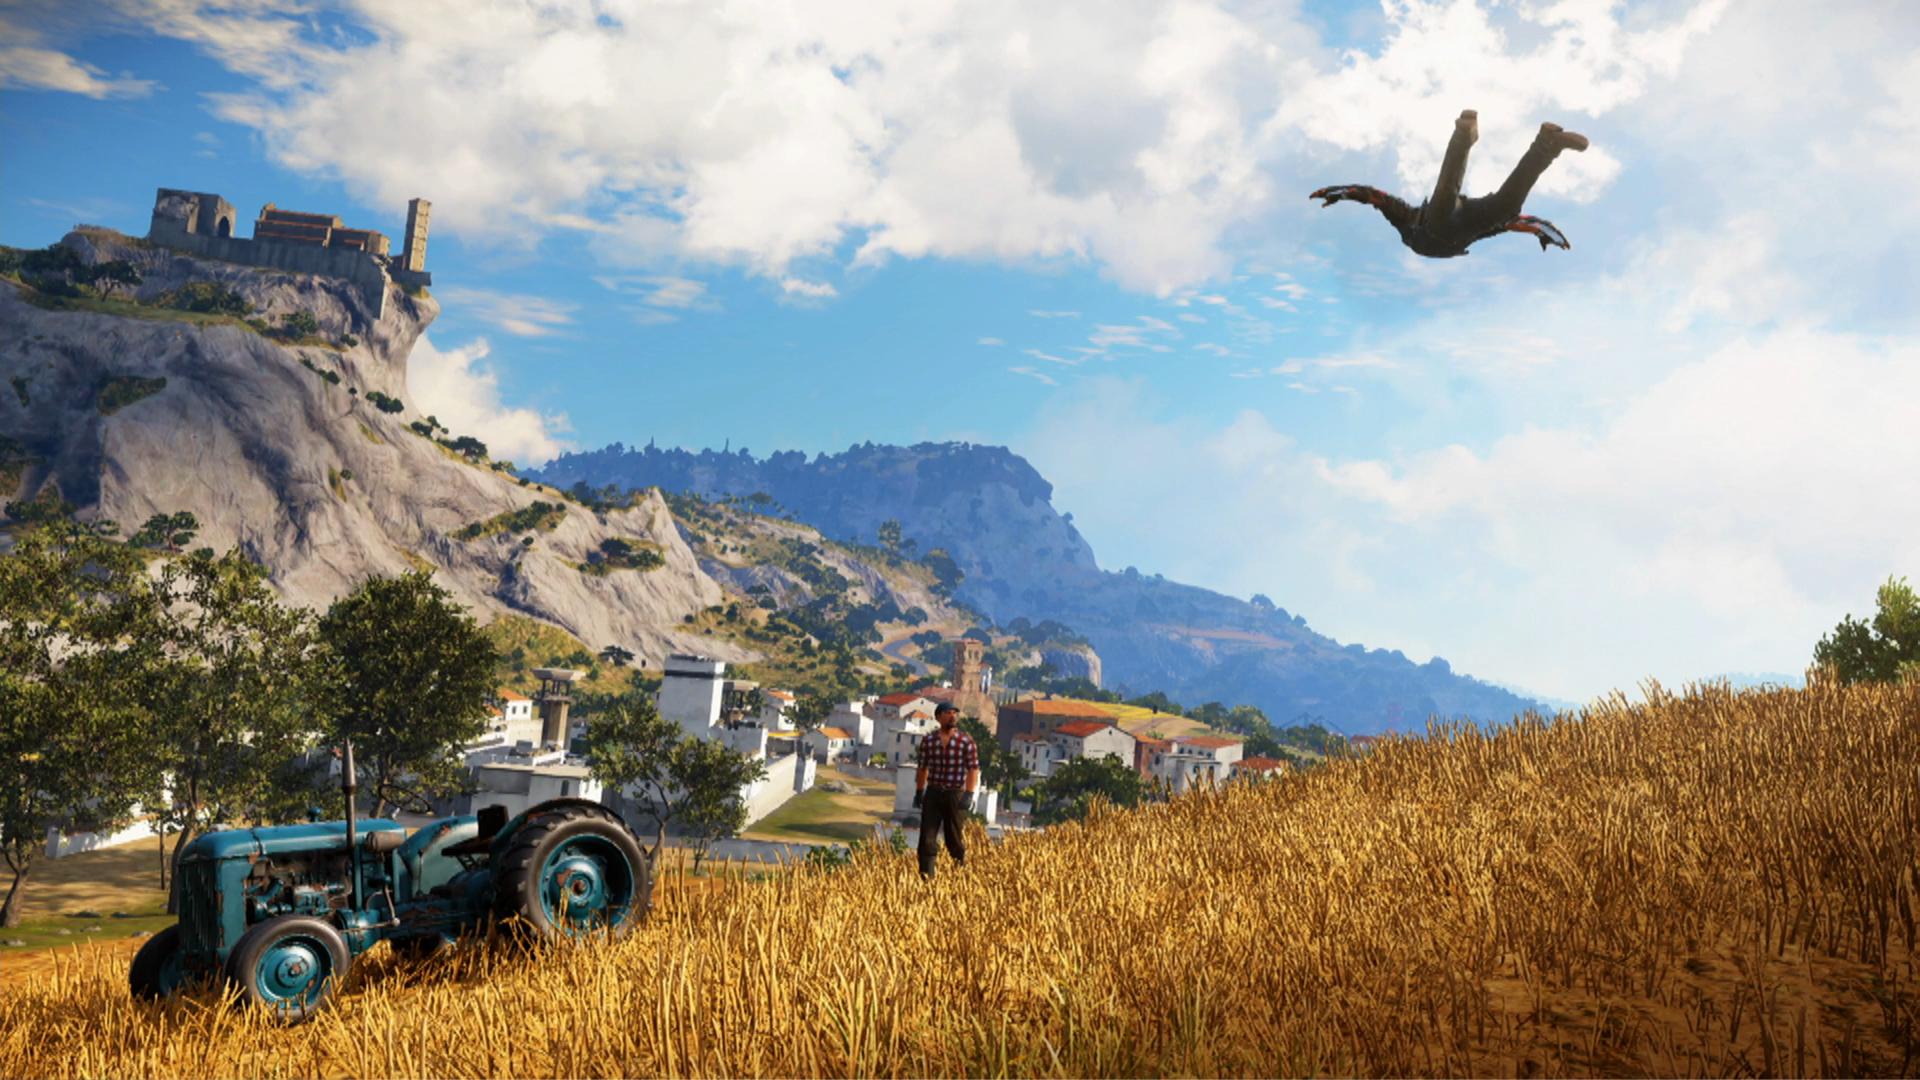 Video Game Just Cause 3 HD Wallpaper | Background Image